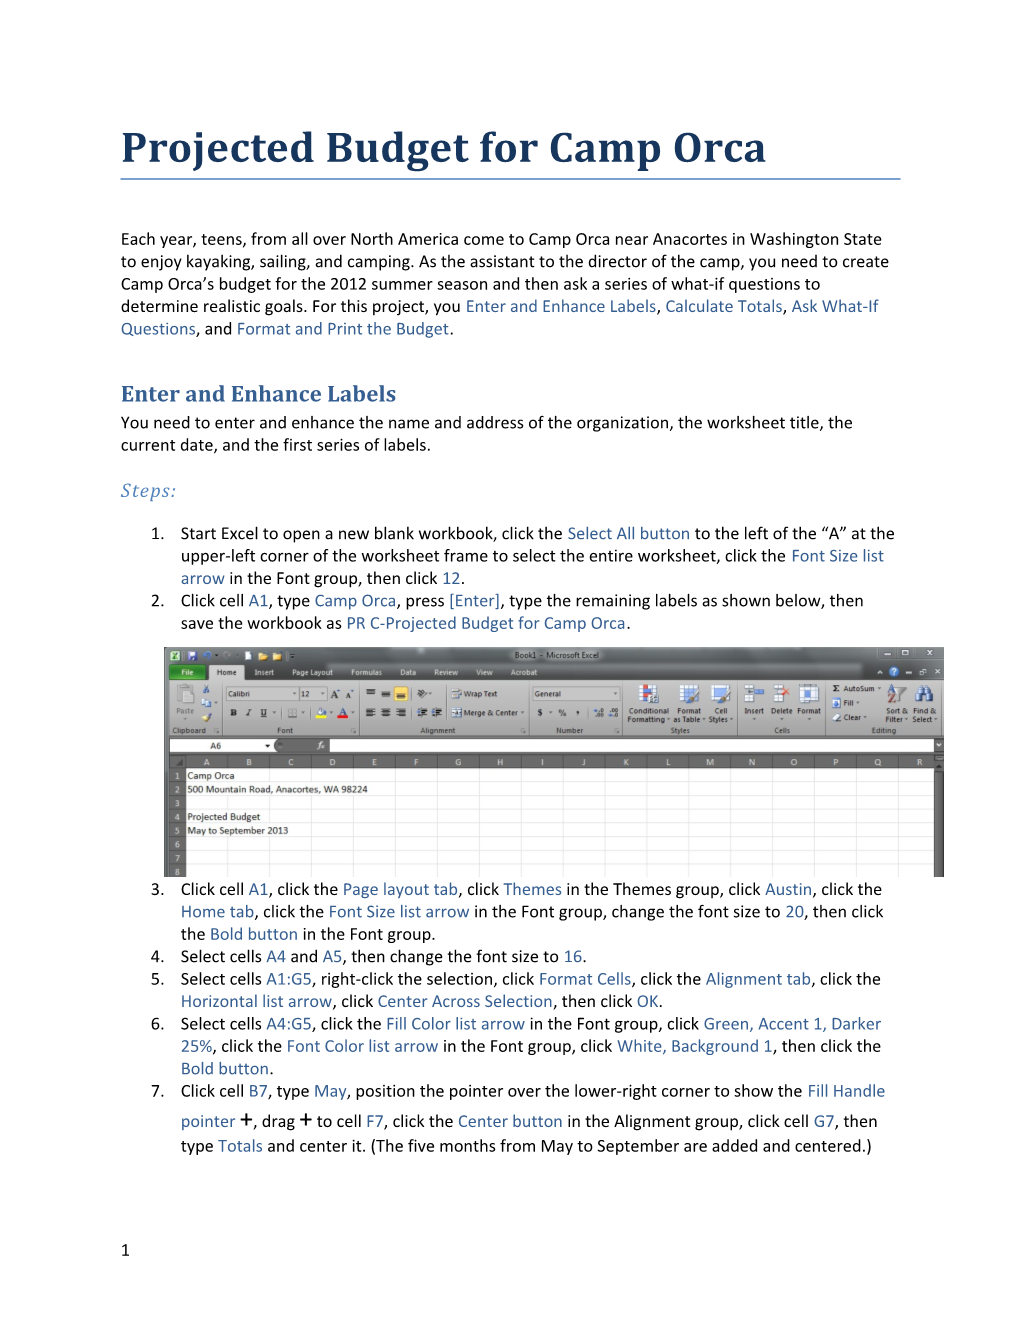 Projected Budget for Camp Orca